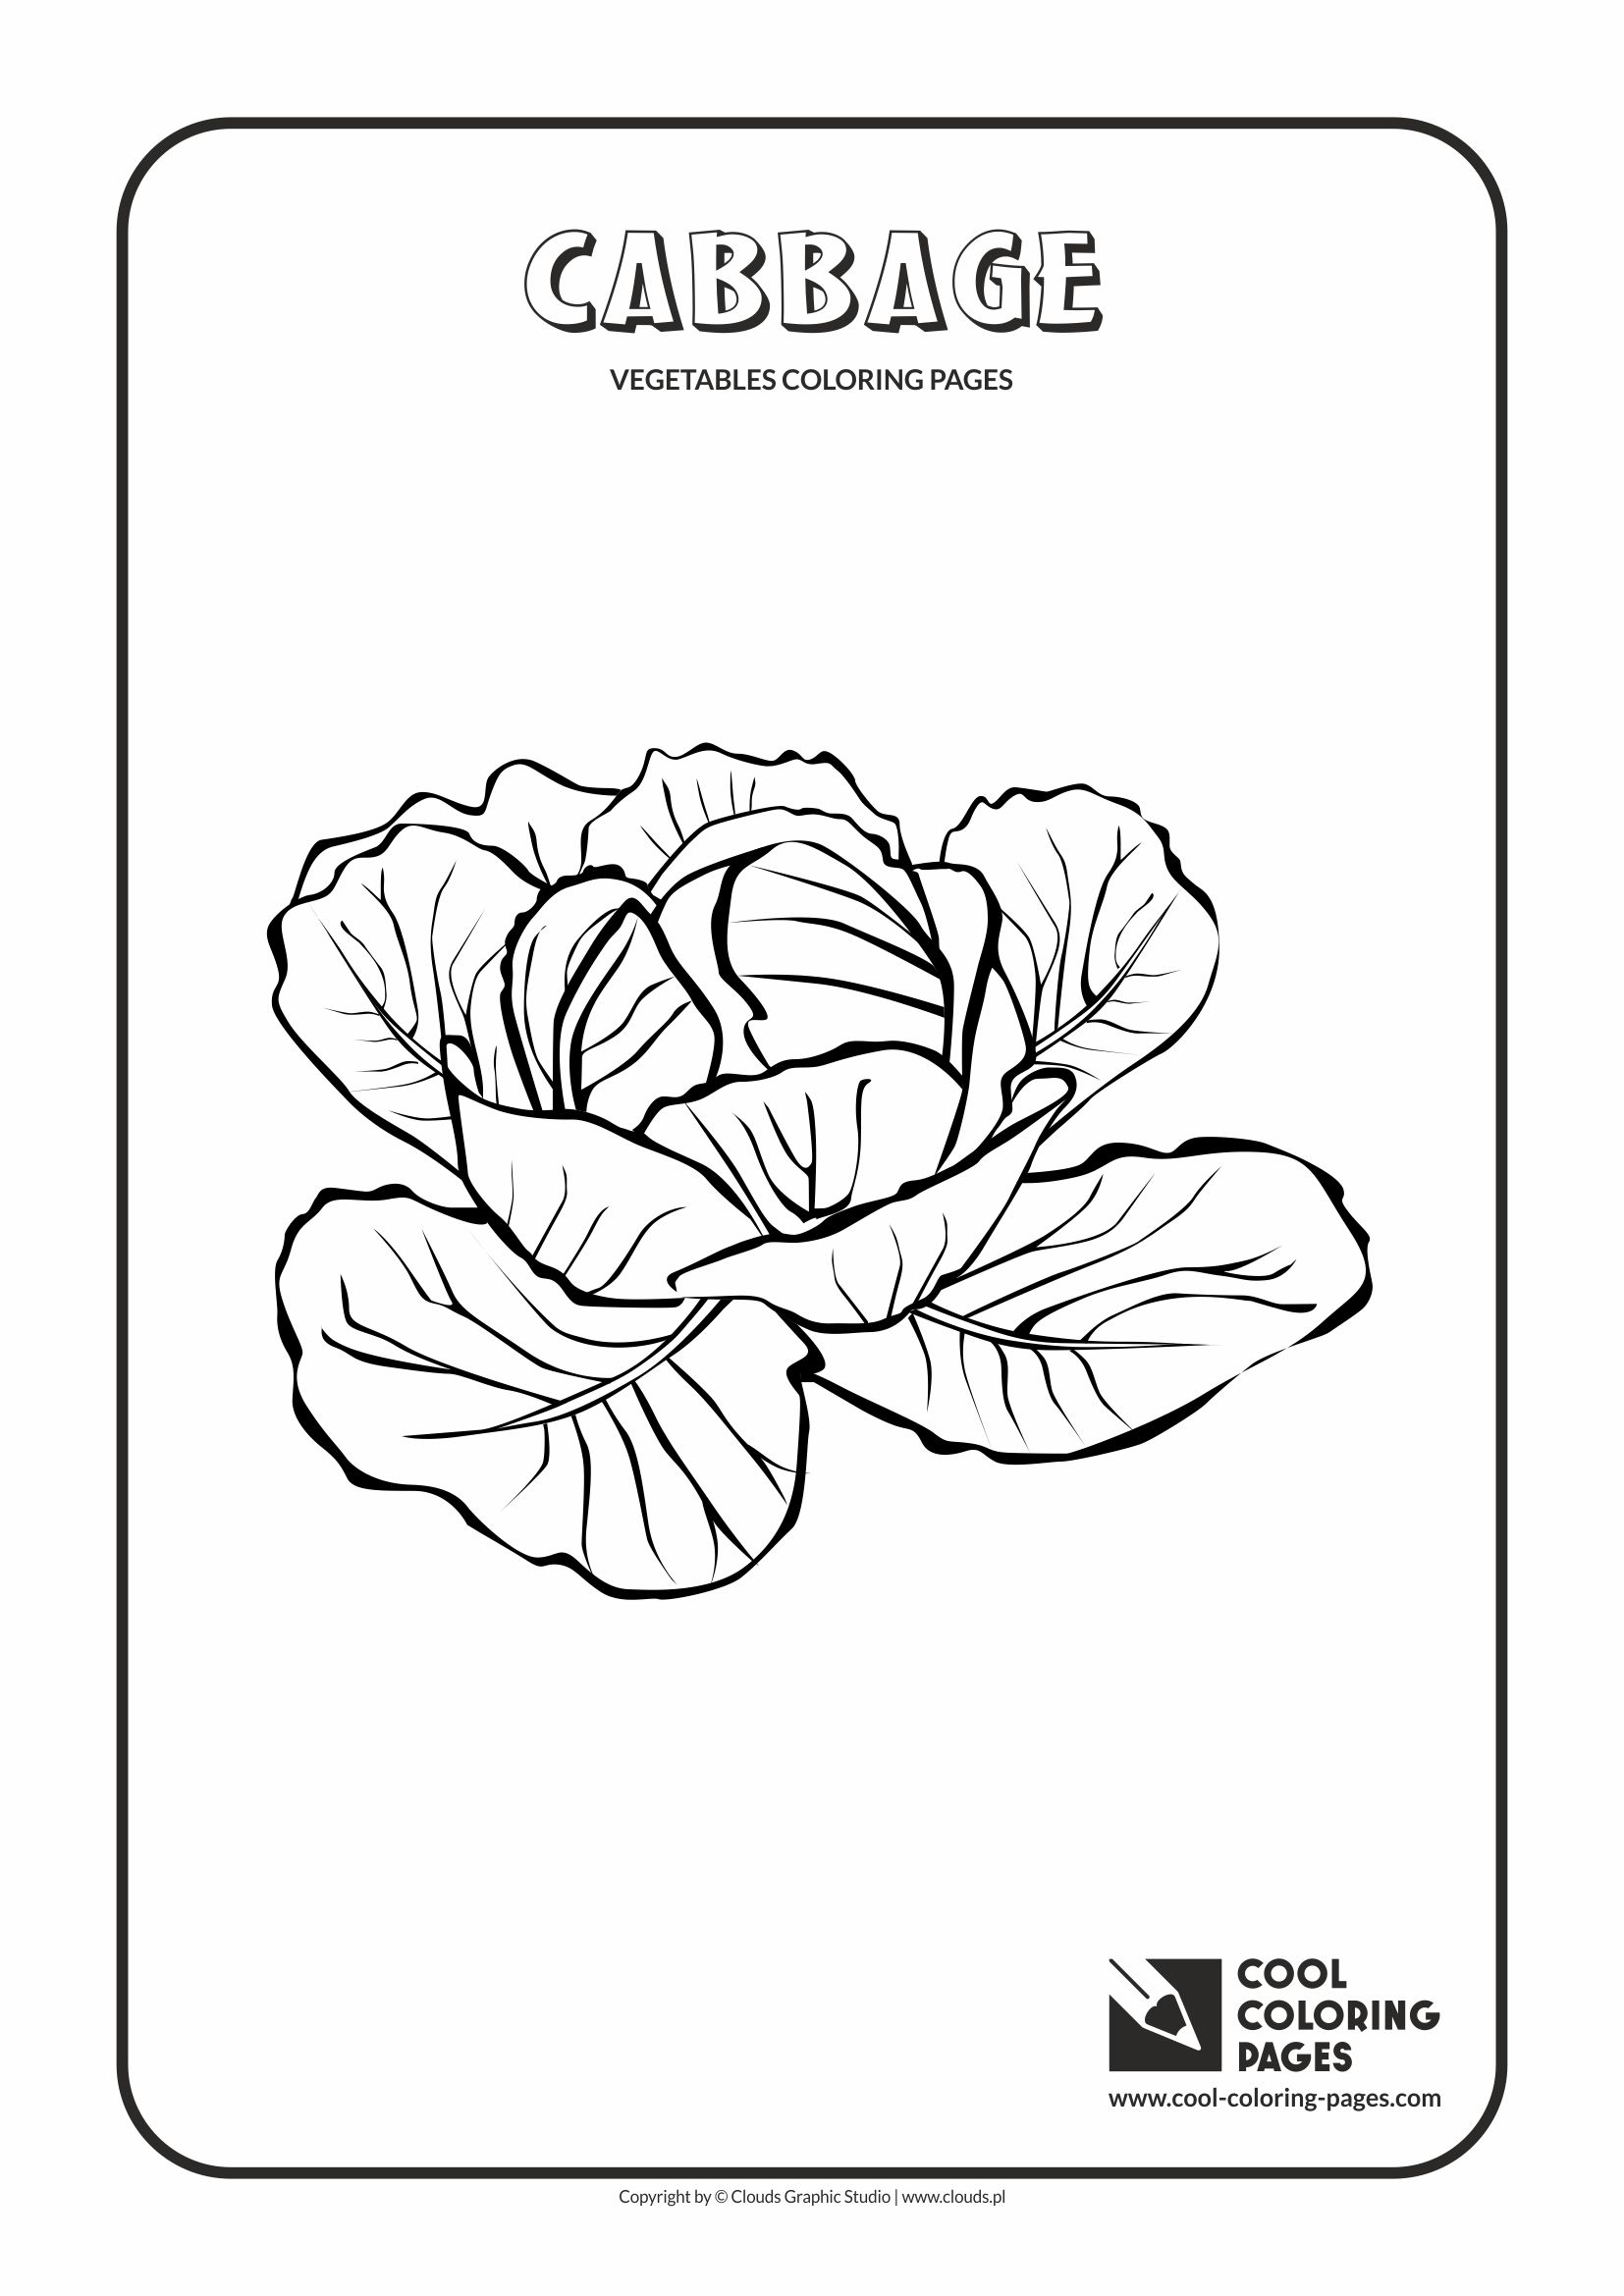 Cool Coloring Pages - Plants / Cabbage / Coloring page with cabbage